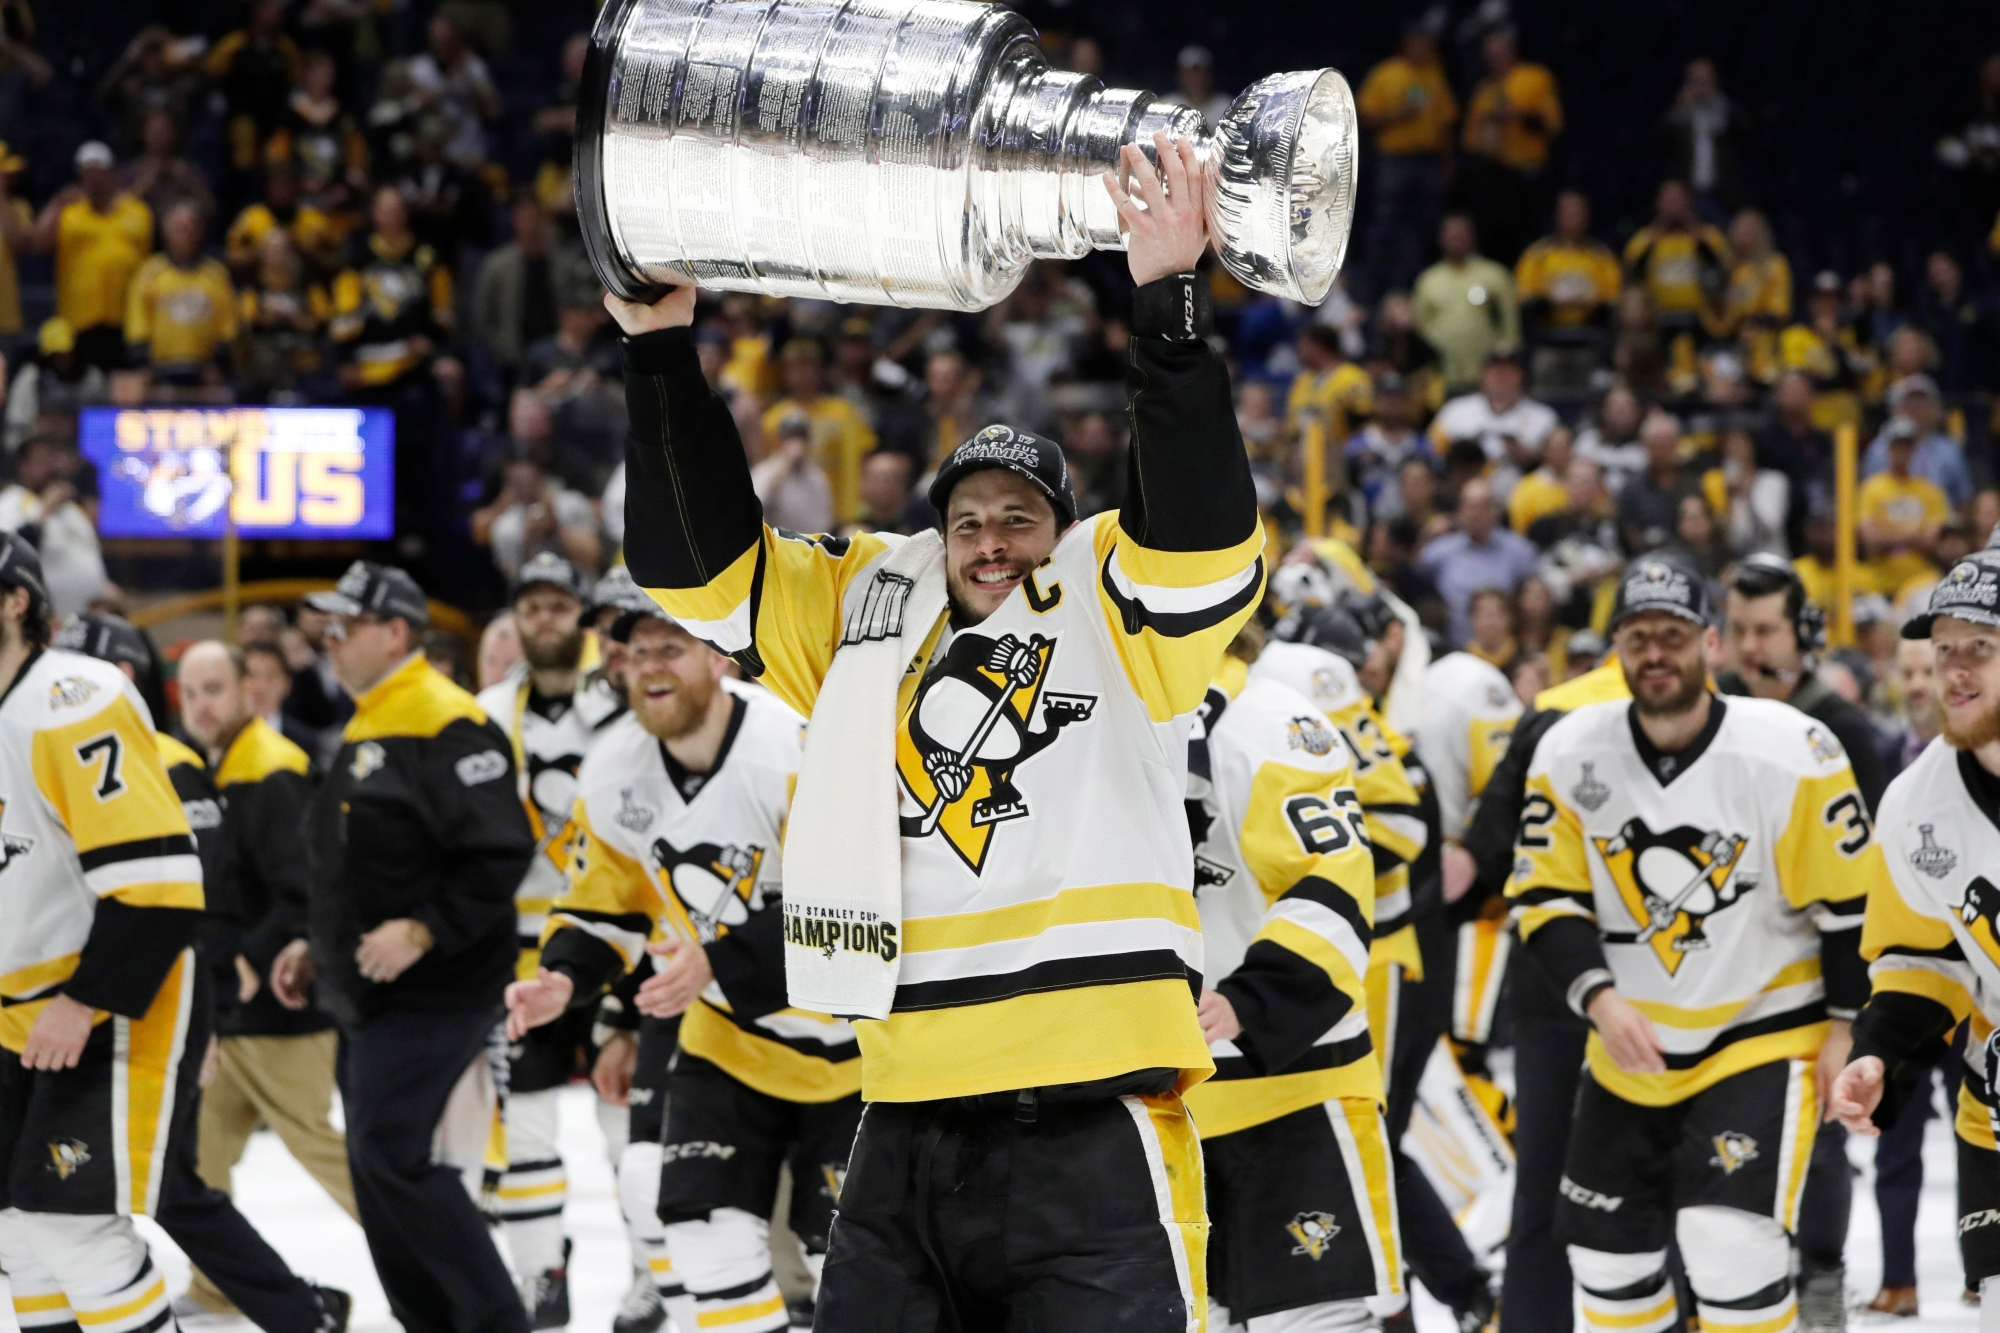 Pittsburgh Penguins' Sidney Crosby (87) celebrates with the Stanley Cup after defeating the Nashville Predators in Game 6 of the NHL hockey Stanley Cup Final, Sunday, June 11, 2017, in Nashville, Tenn. (AP Photo/Mark Humphrey) Stanley Cup Penguins Predators Hockey